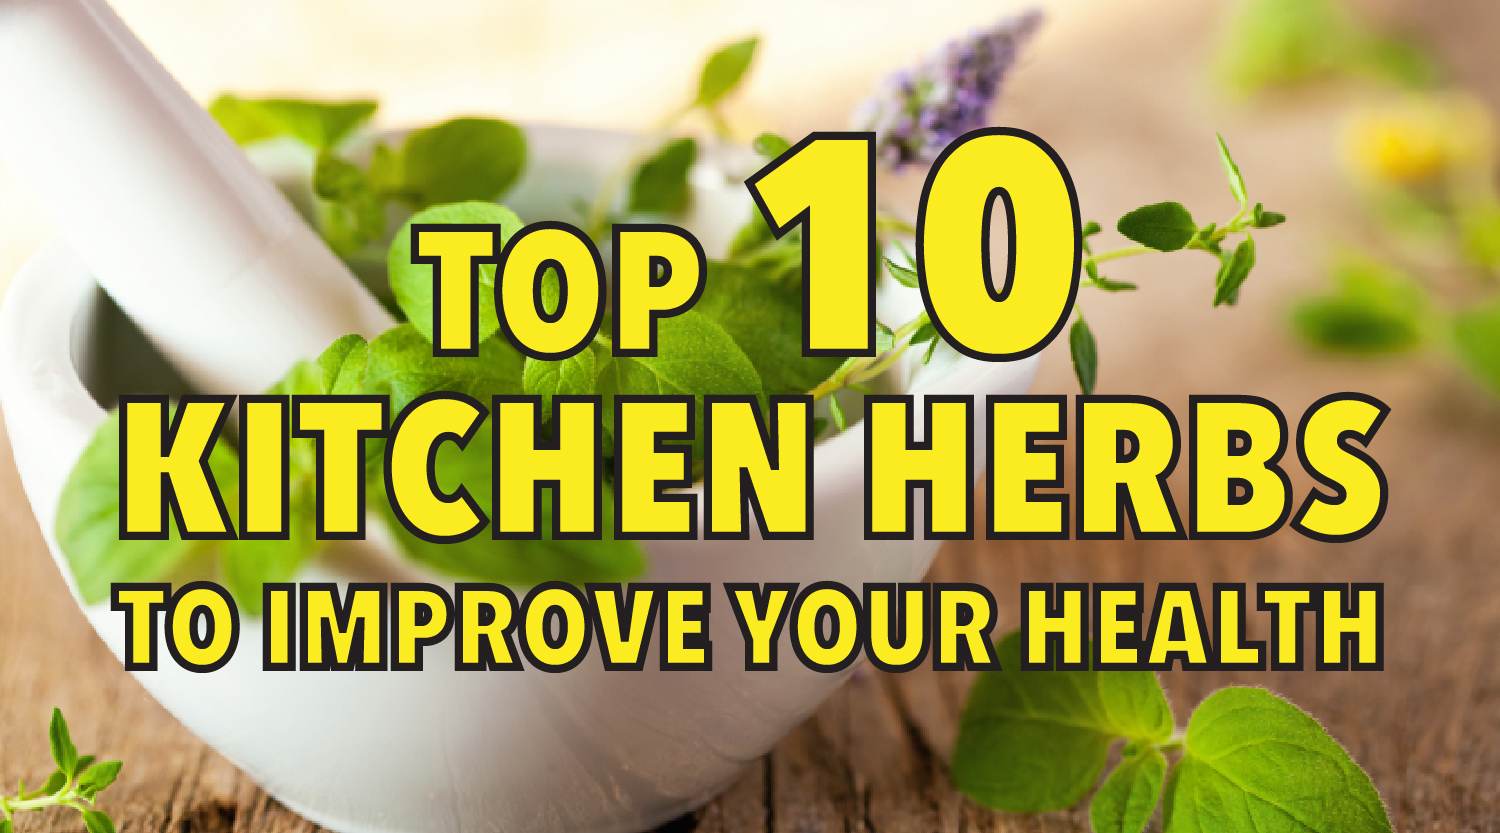 Top 10 kitchen herbs to improve your health